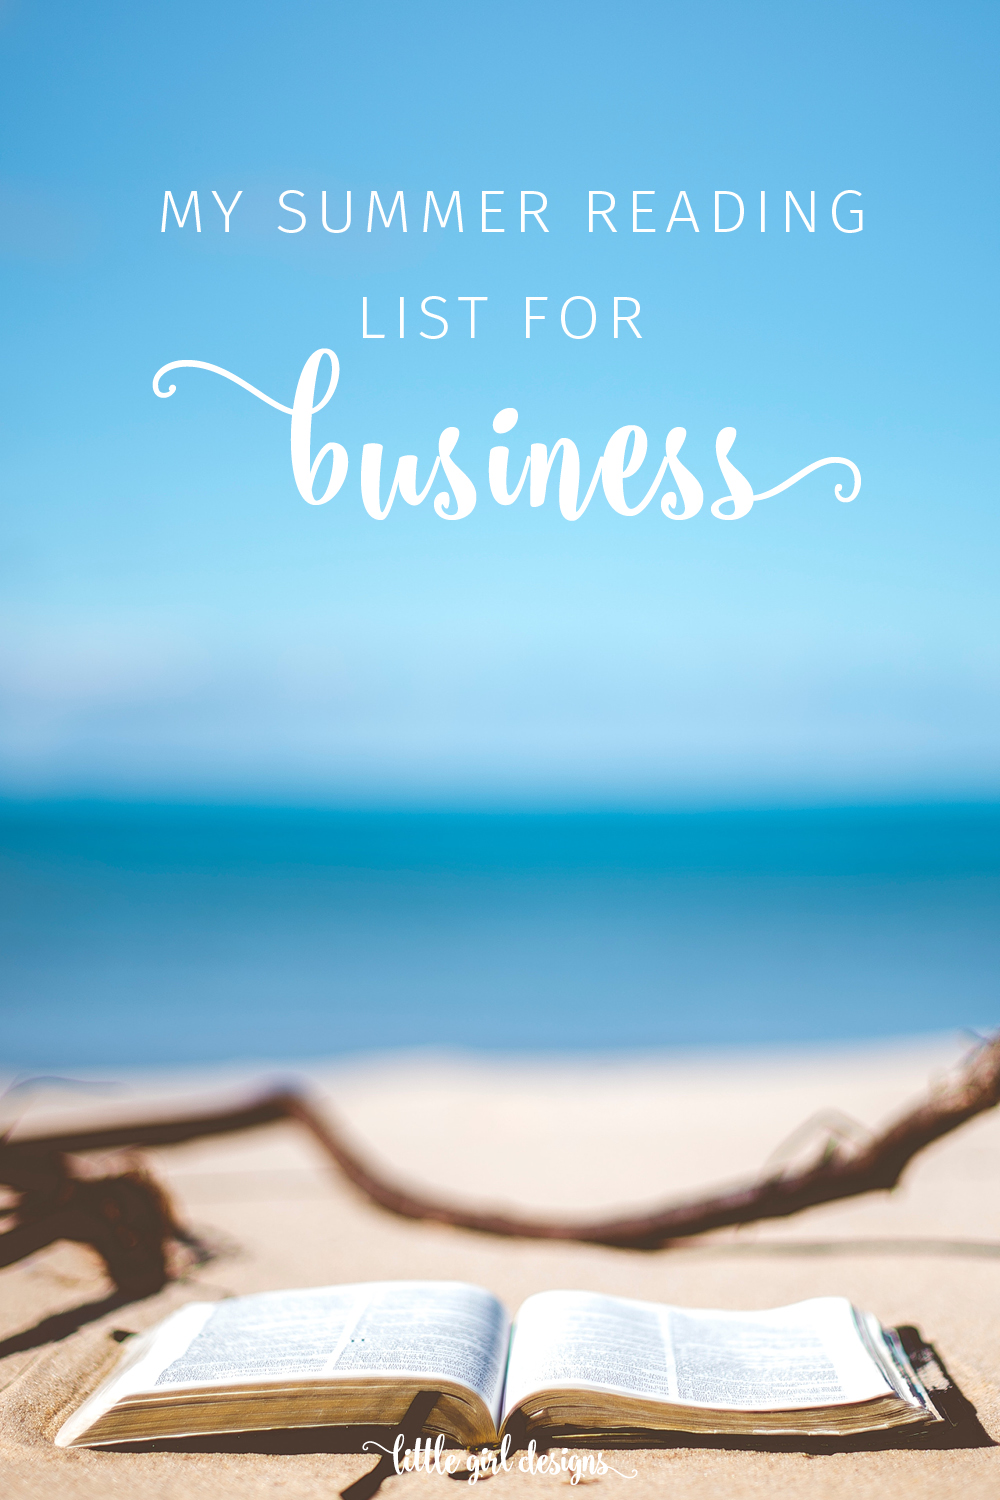 Summer Reading List for Your Business